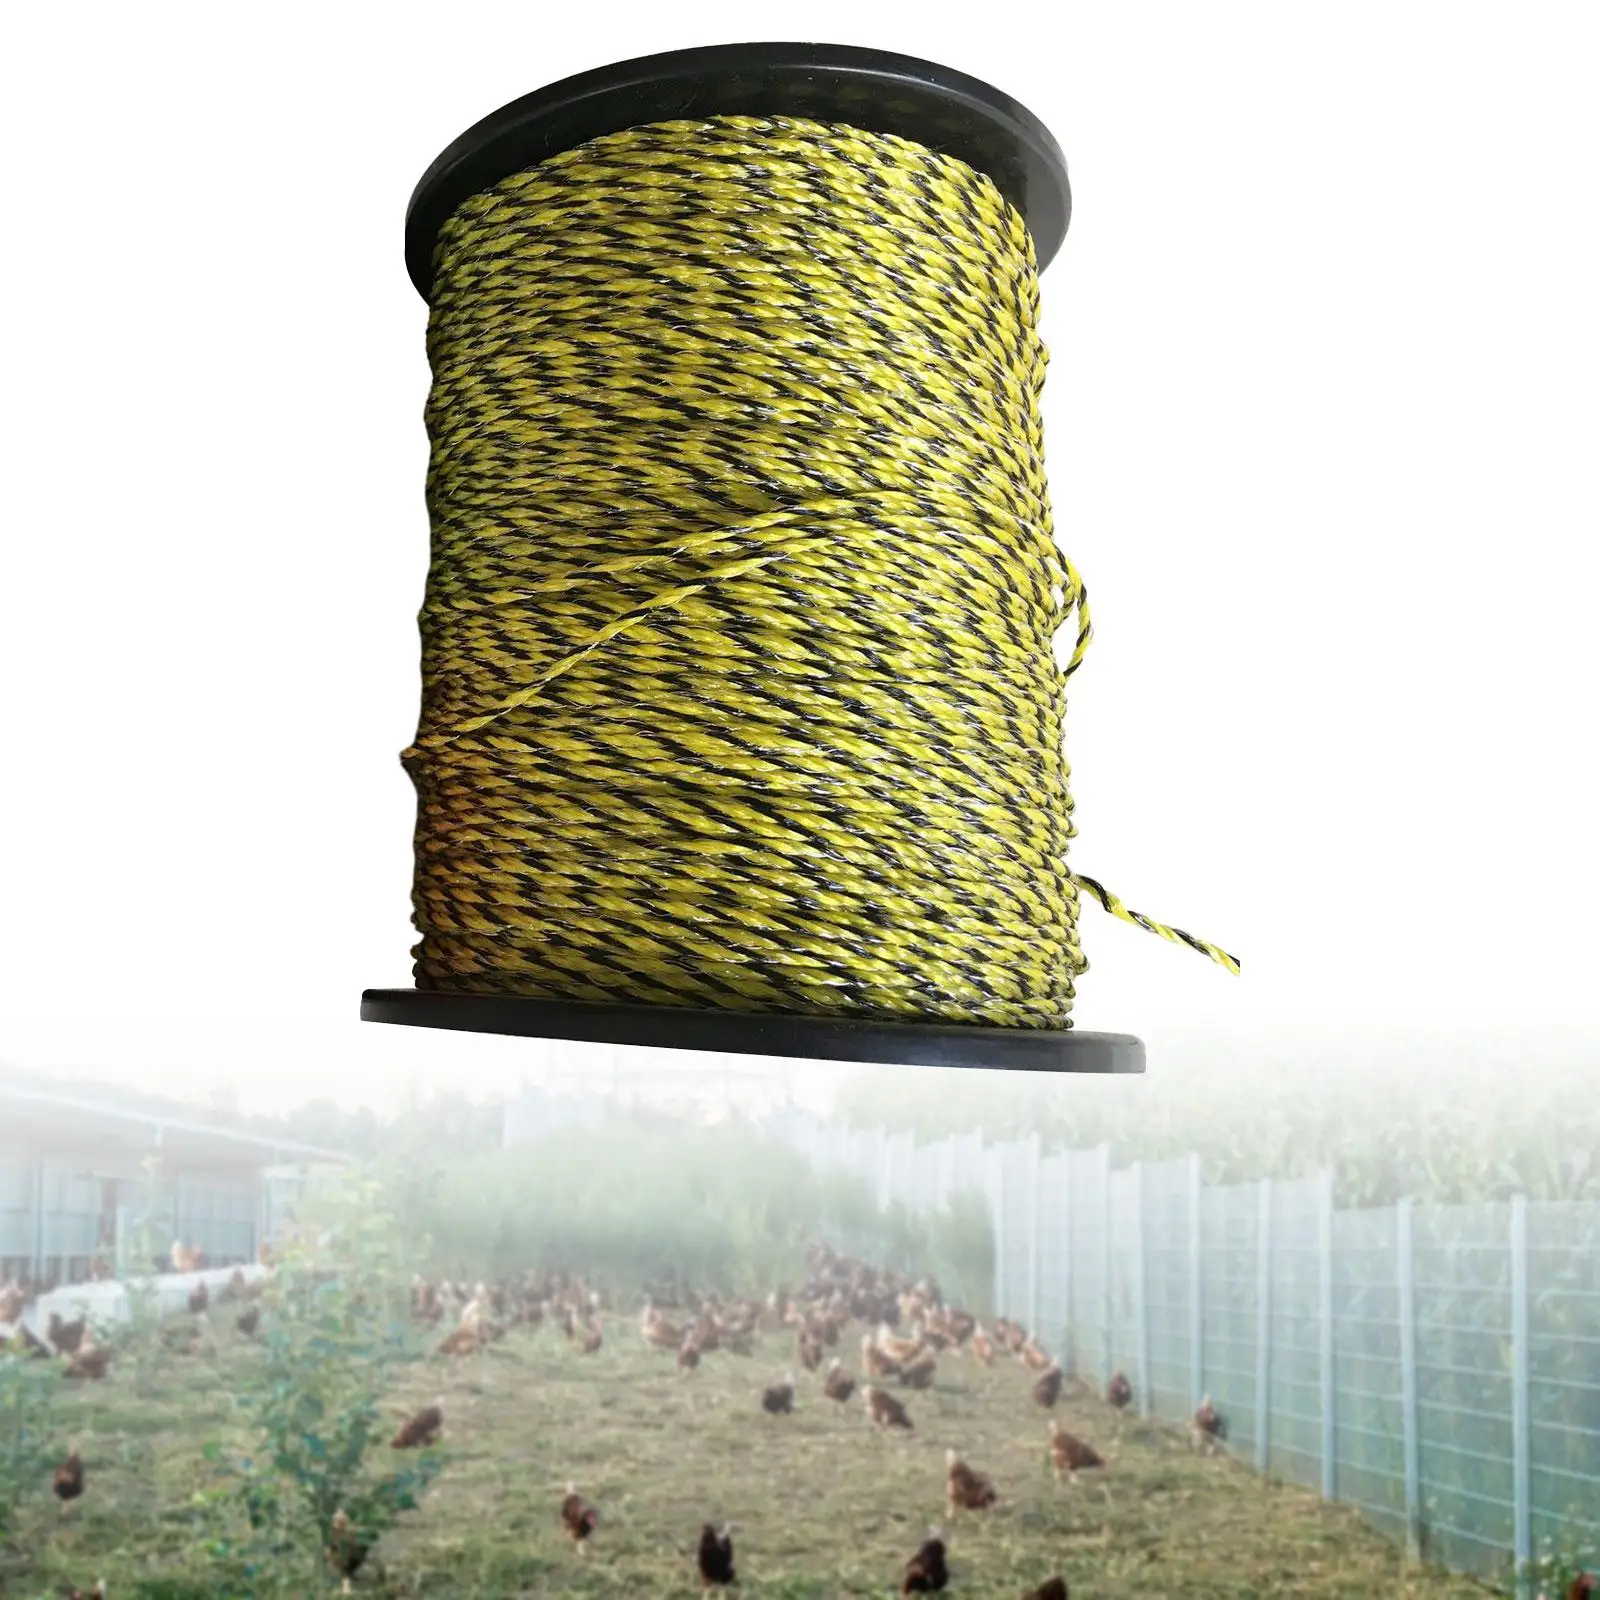 Fence Polywire for Electric Fencing Cattle Portable Upgraded Dogs Poly Rope